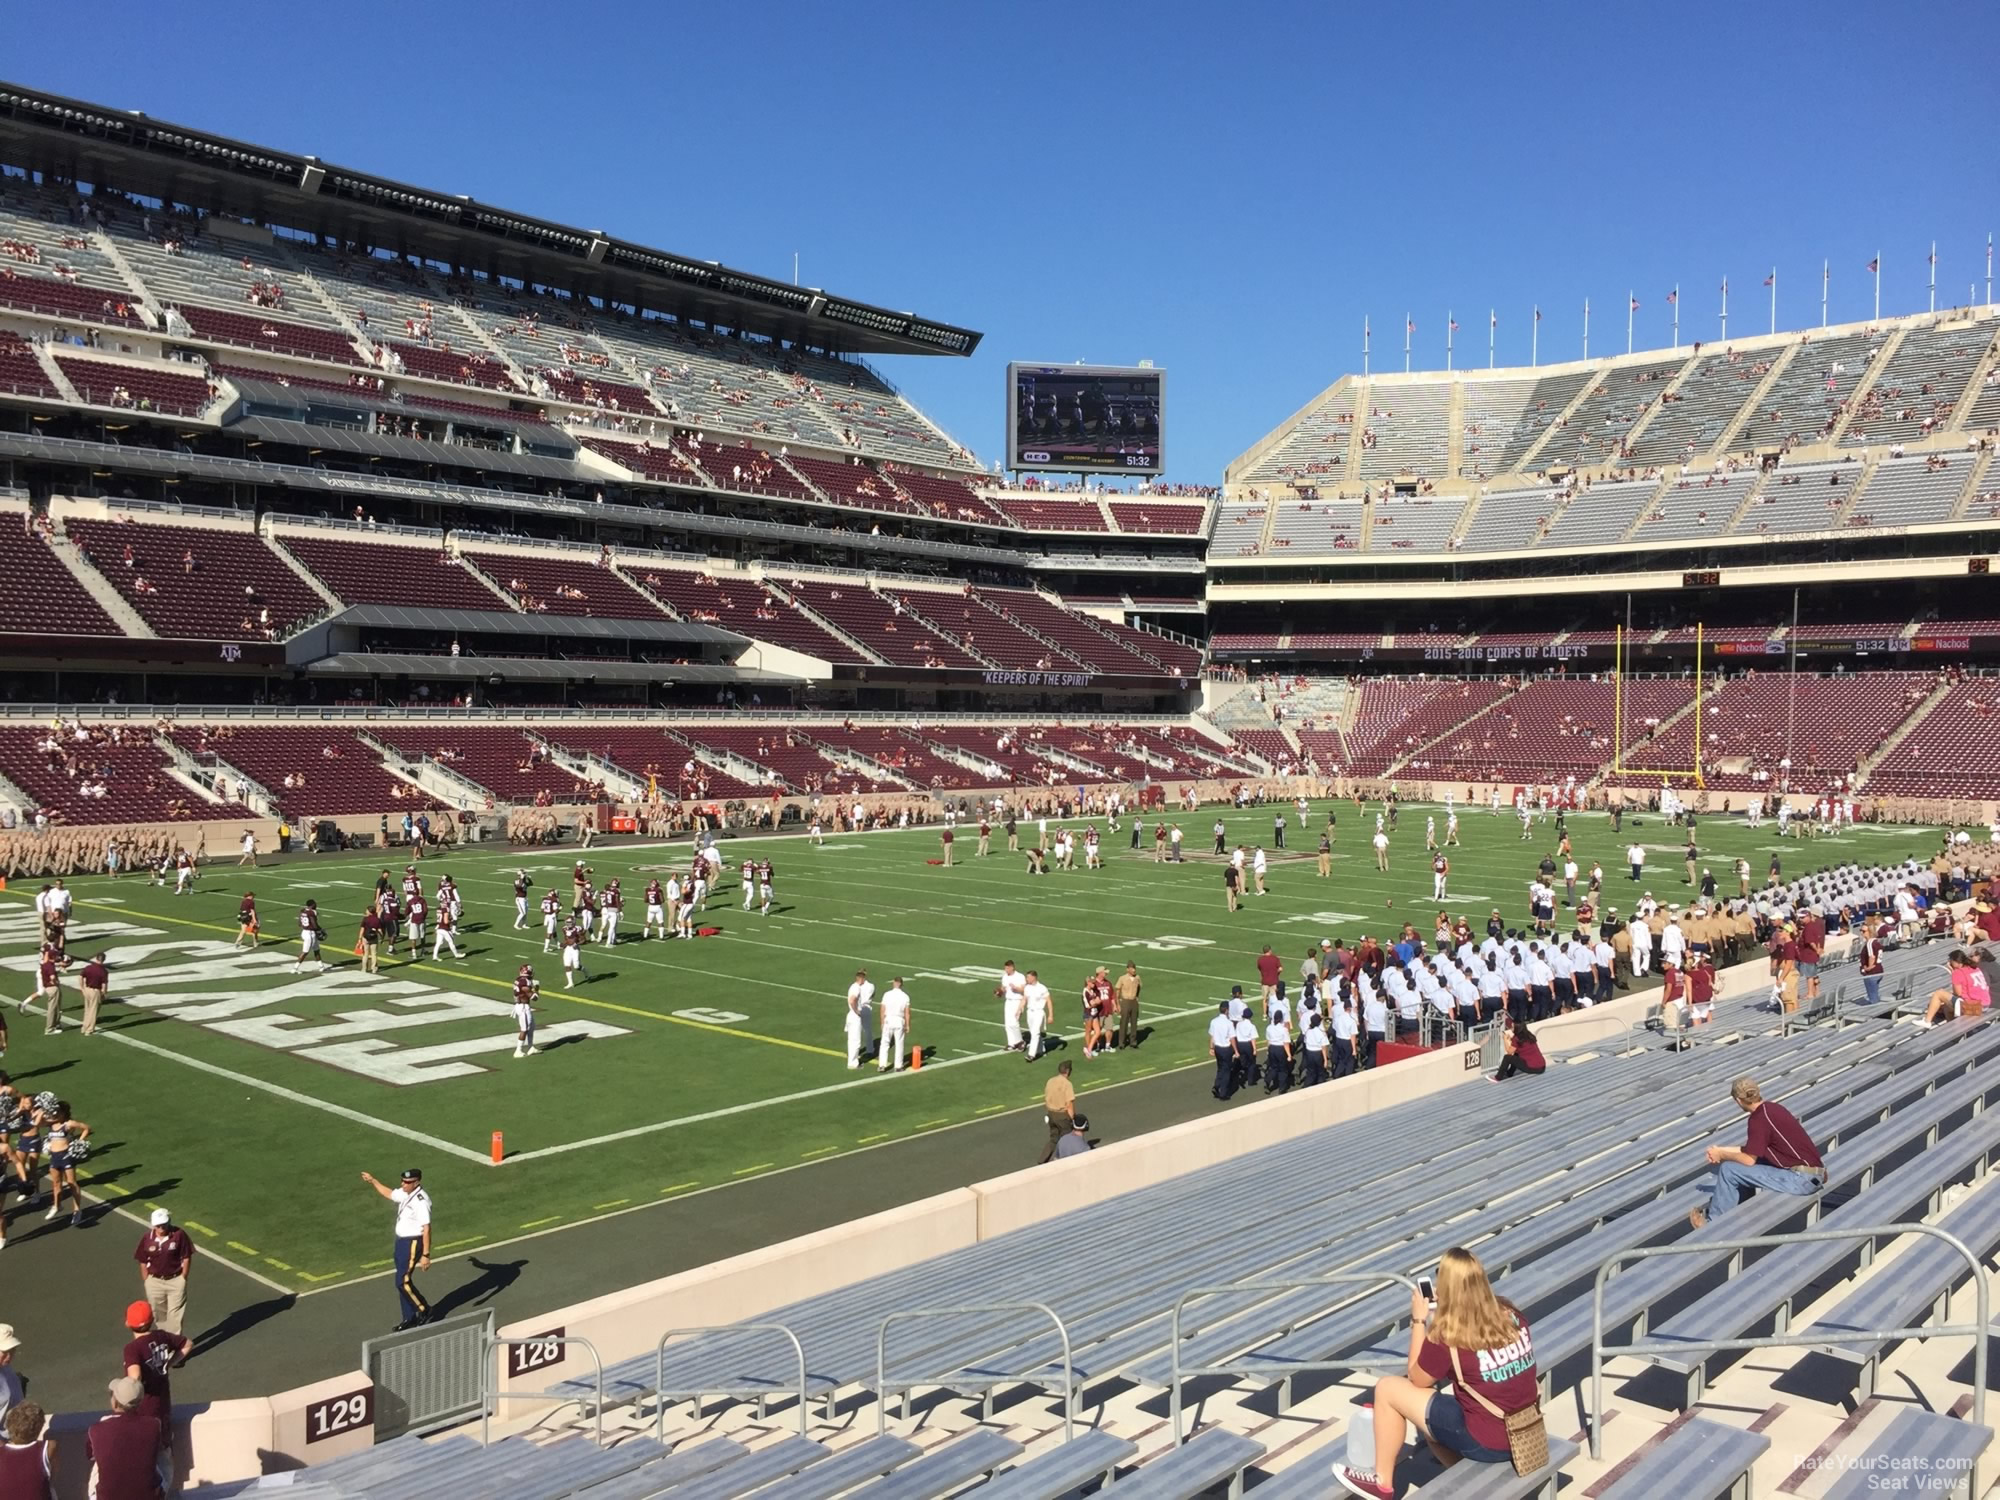 section 129, row 20 seat view  - kyle field